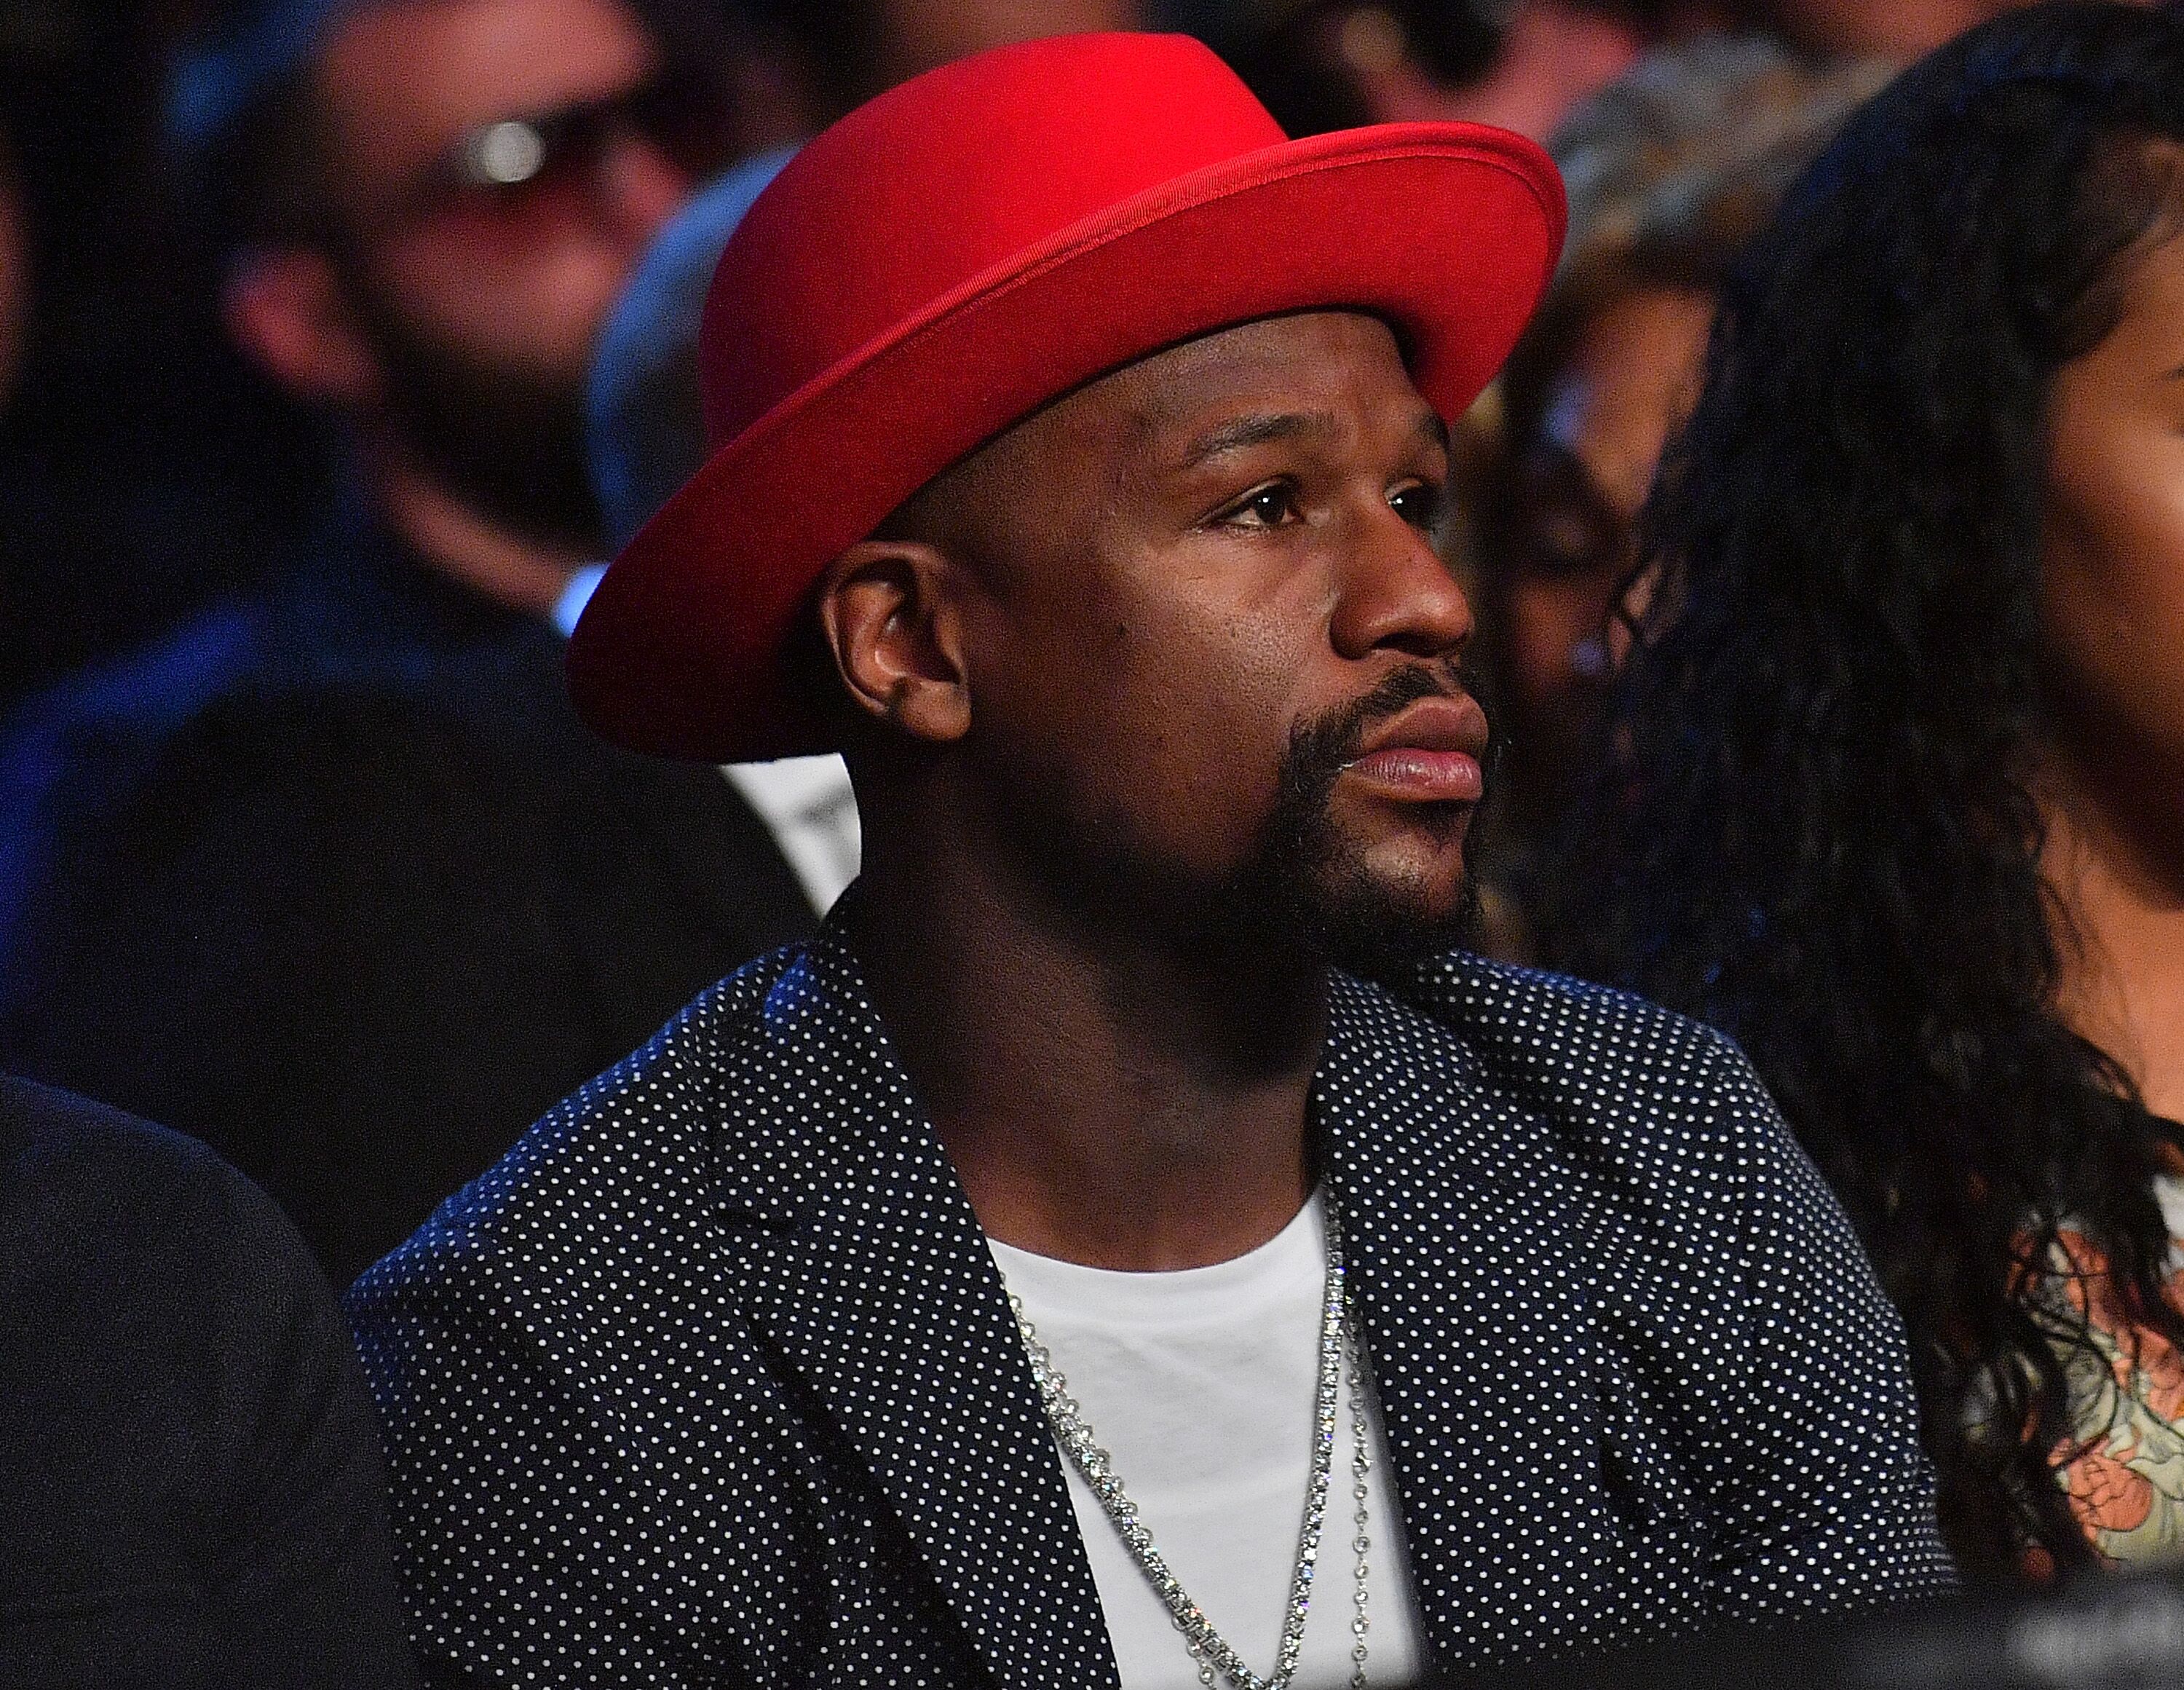 Floyd Mayweather Jr. looks on during the junior middleweight bout at The Joint inside the Hard Rock Hotel & Casino on April 7, 2018 in Las Vegas, Nevada. | Source: Getty Images